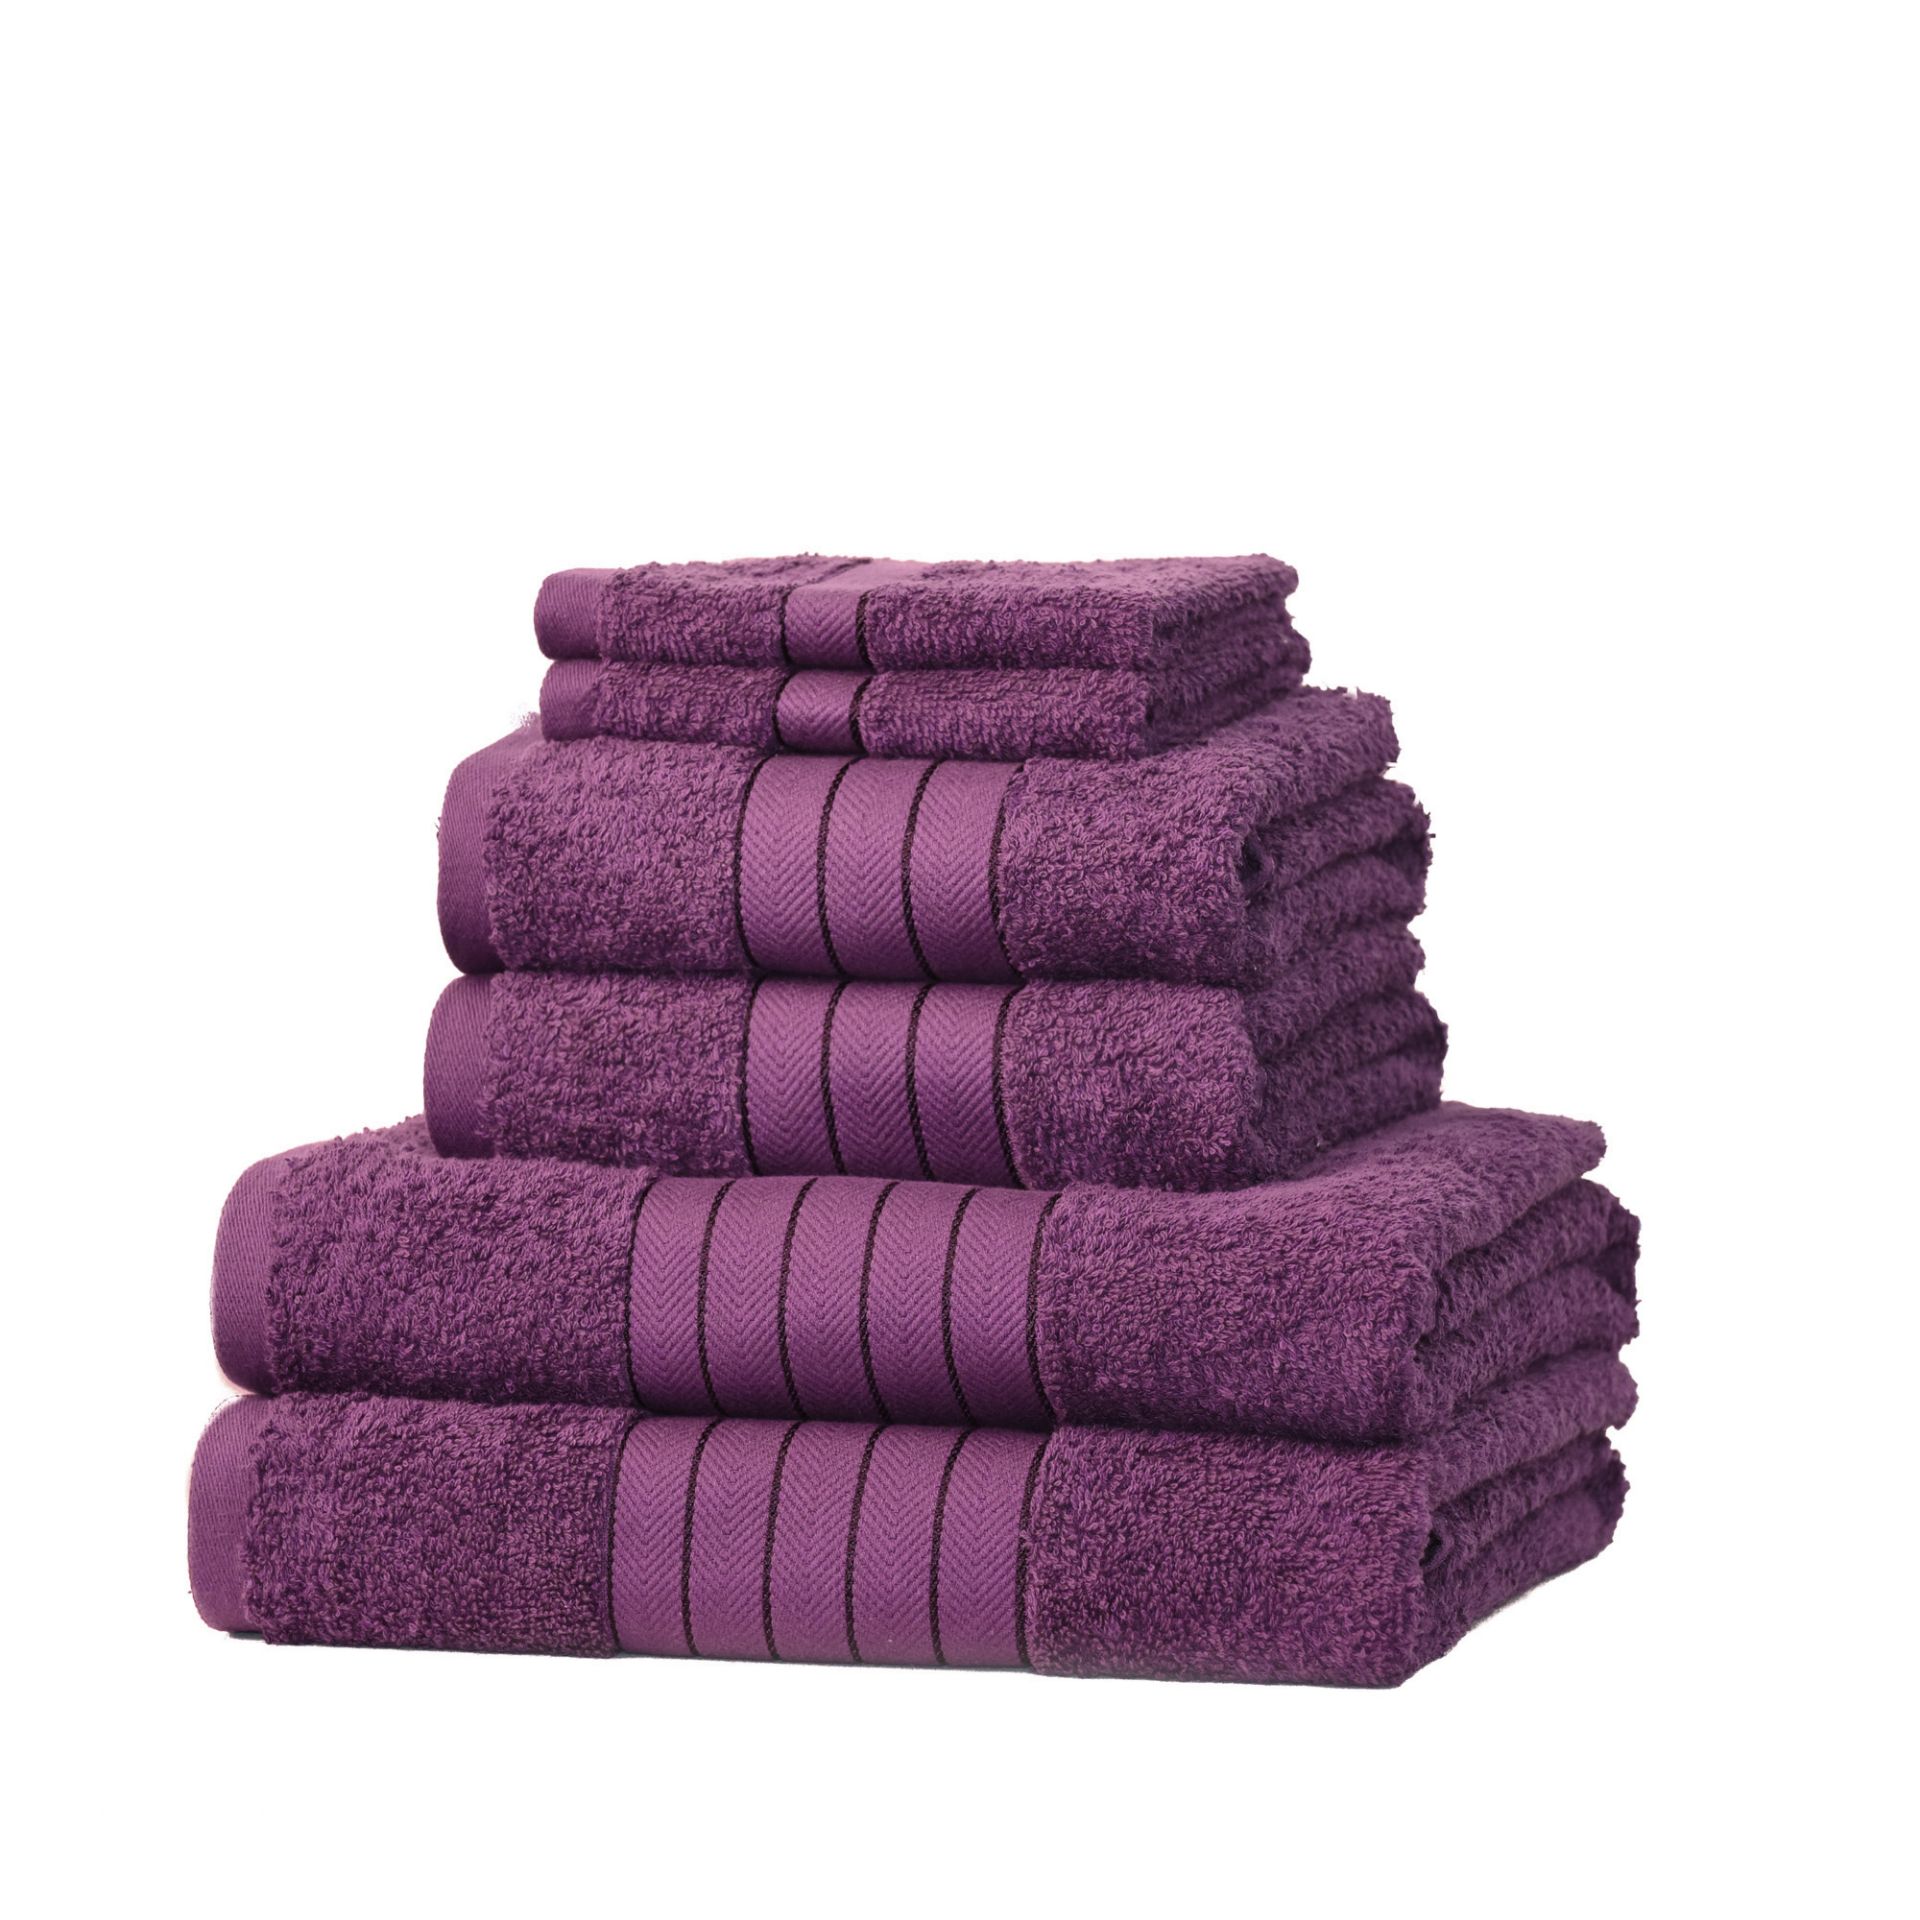 V *TRADE QTY* Brand New Aubergine 6 Piece Towel Bale Set With 2 Face Towels - 2 Hand Towels - 1 Bath